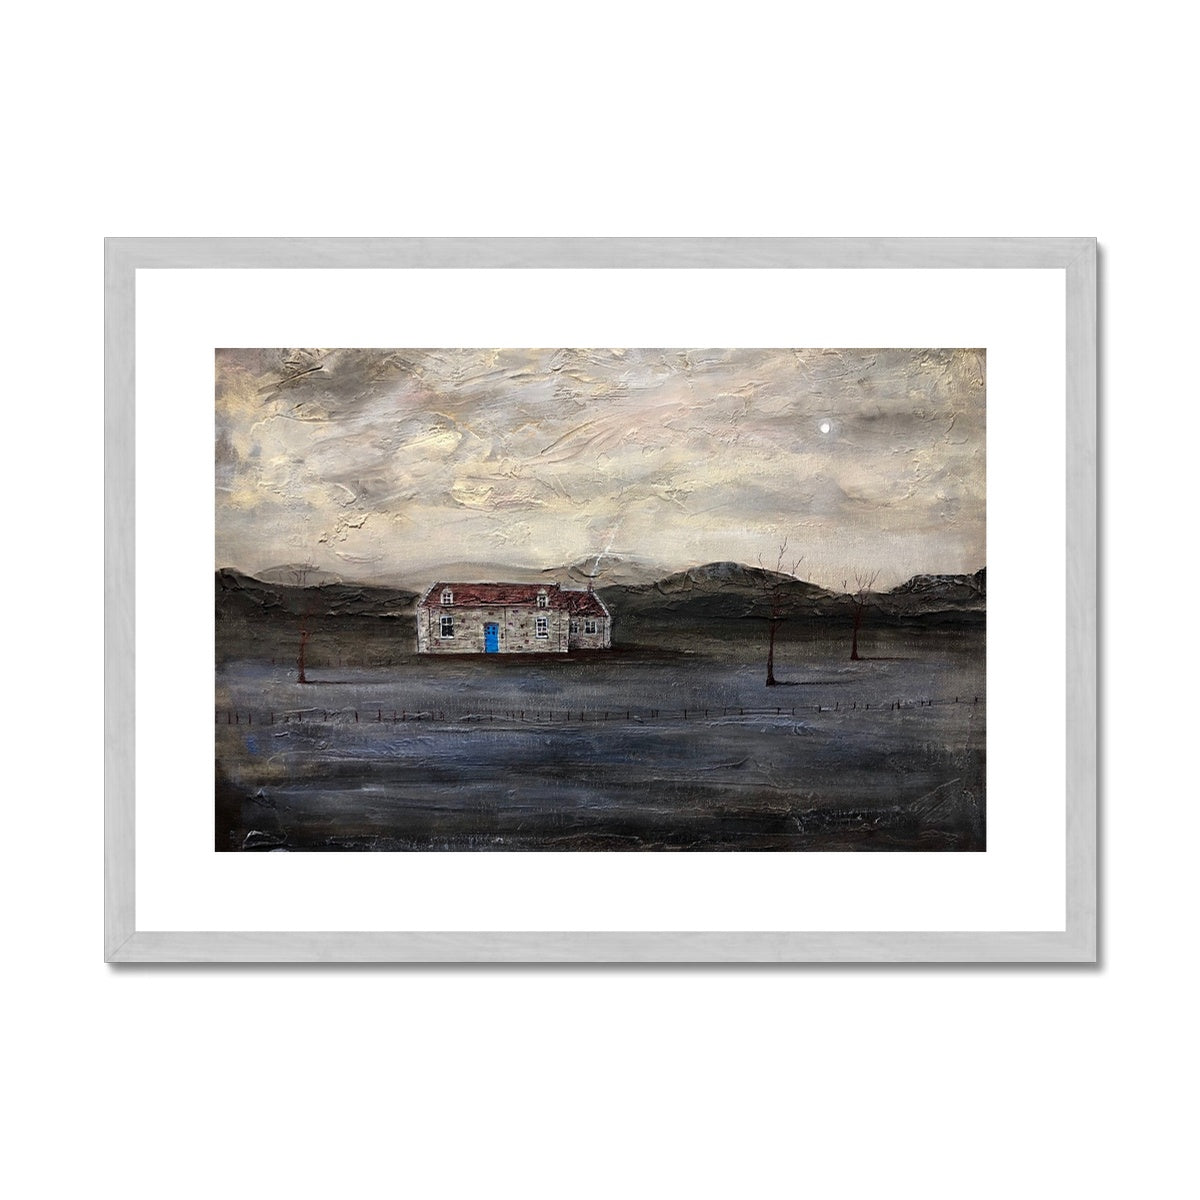 The Blue Door Burn Altmore Cottage Painting | Antique Framed & Mounted Prints From Scotland-Antique Framed & Mounted Prints-Scottish Highlands & Lowlands Art Gallery-A2 Landscape-Silver Frame-Paintings, Prints, Homeware, Art Gifts From Scotland By Scottish Artist Kevin Hunter